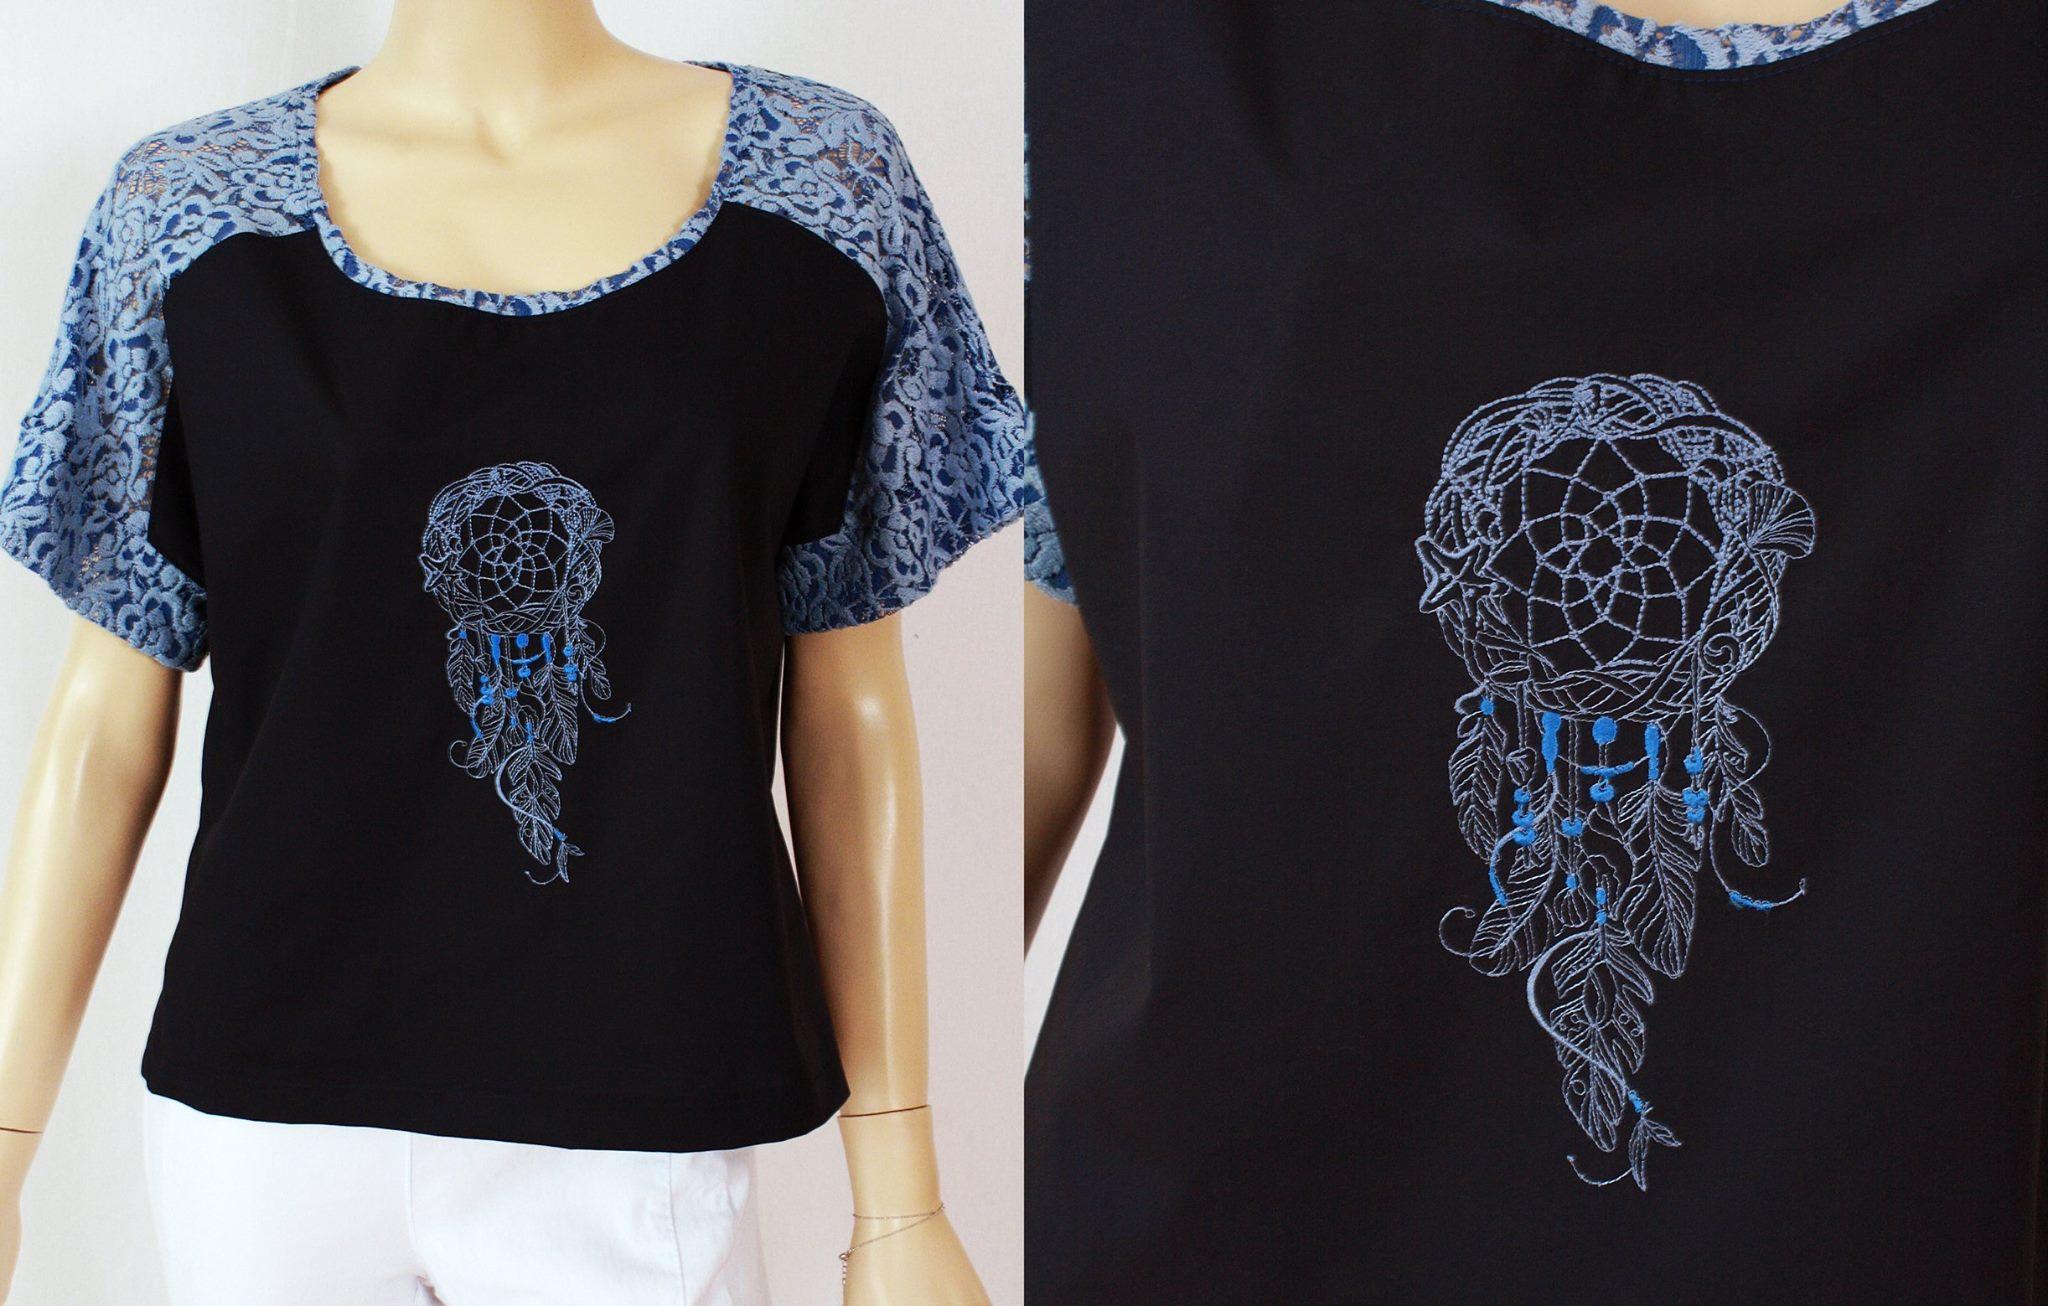 Blouse with Dreamcatcher embroidery design